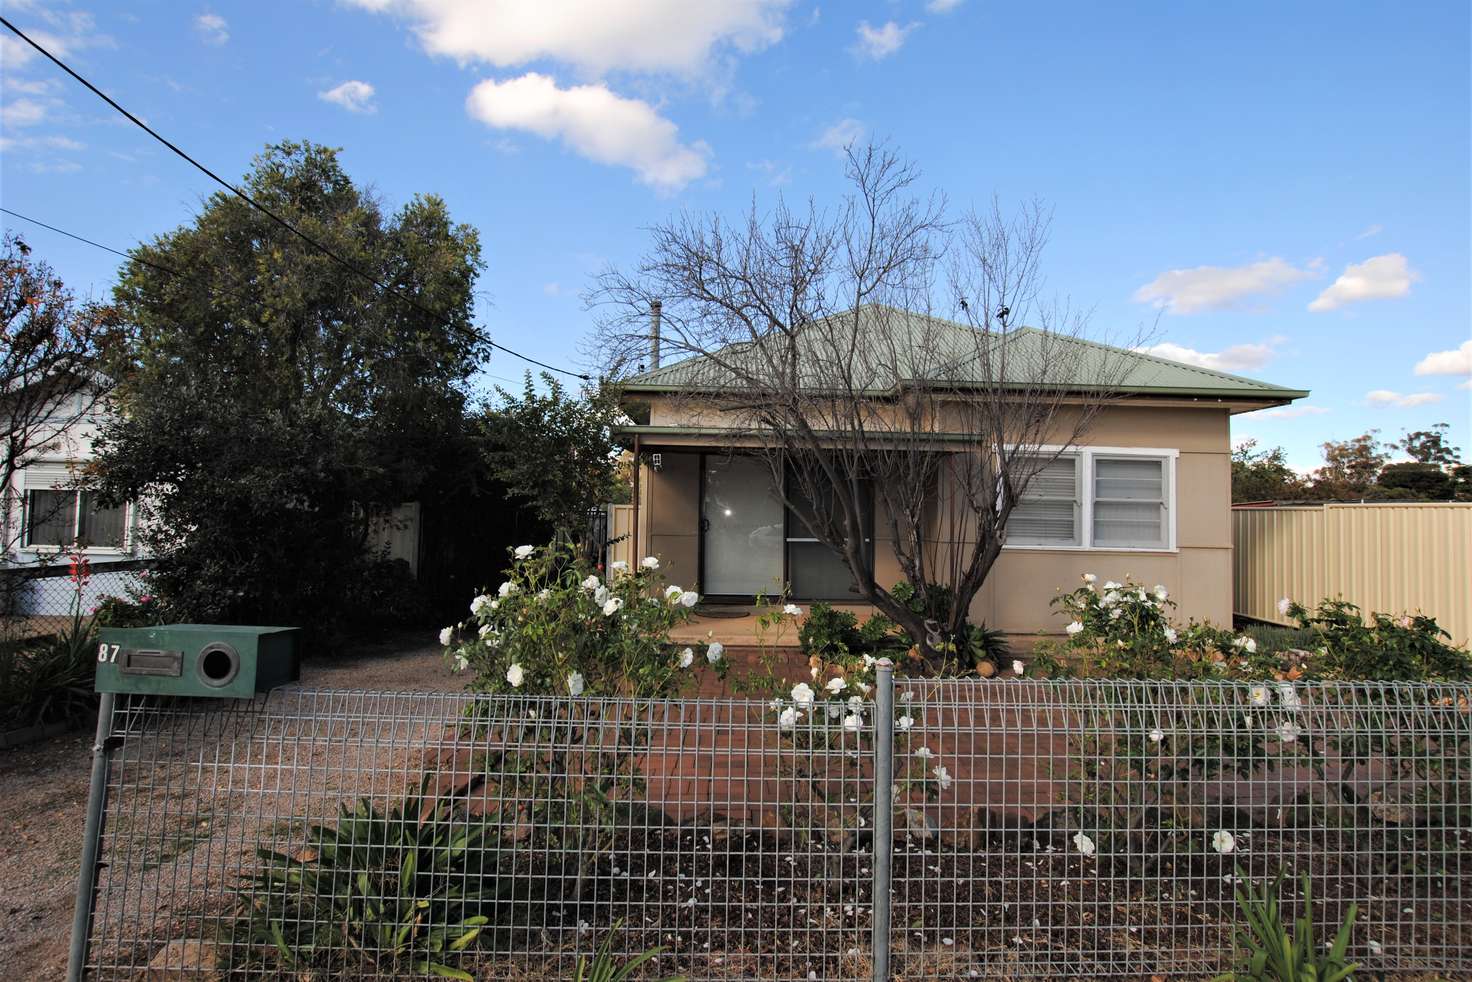 Main view of Homely house listing, 87 Lawson Street, Mudgee NSW 2850